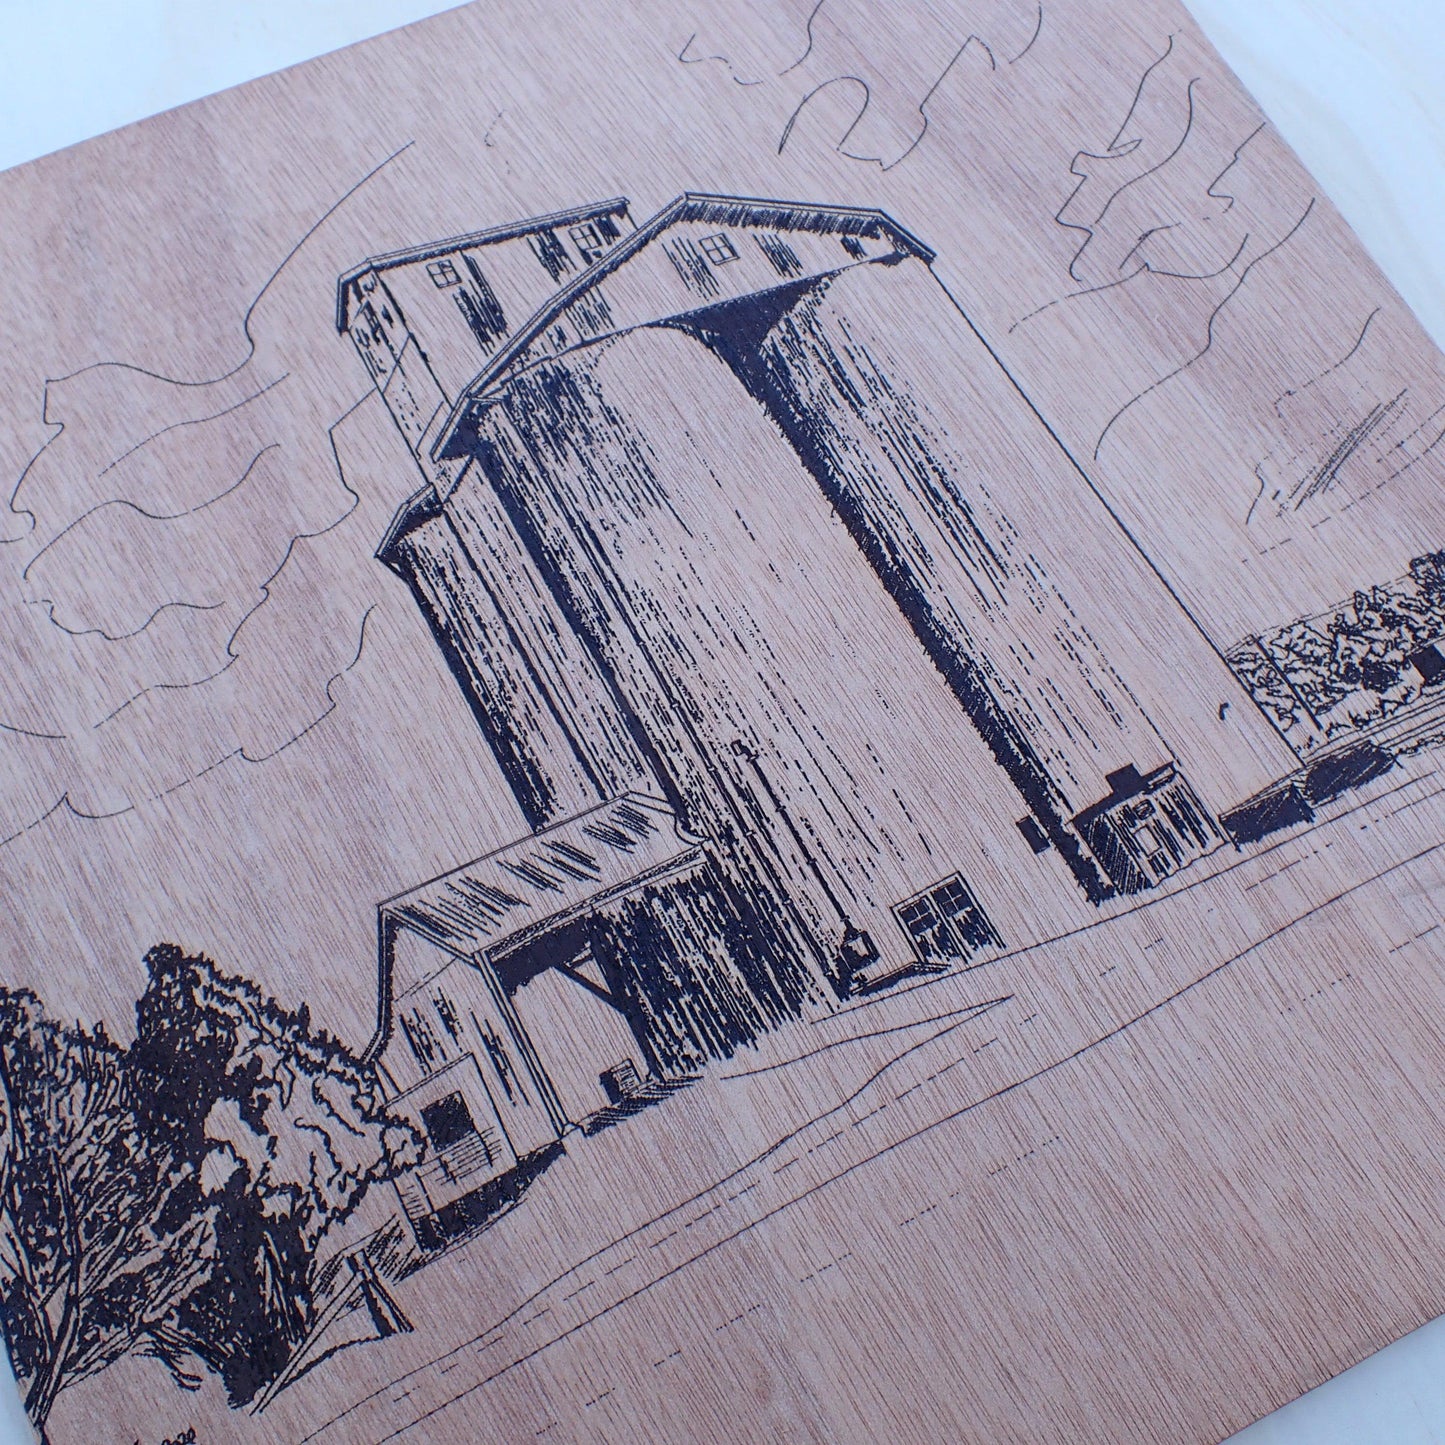 Sketch of a Grain Silo on 4mm Ply - Burning Man Designs